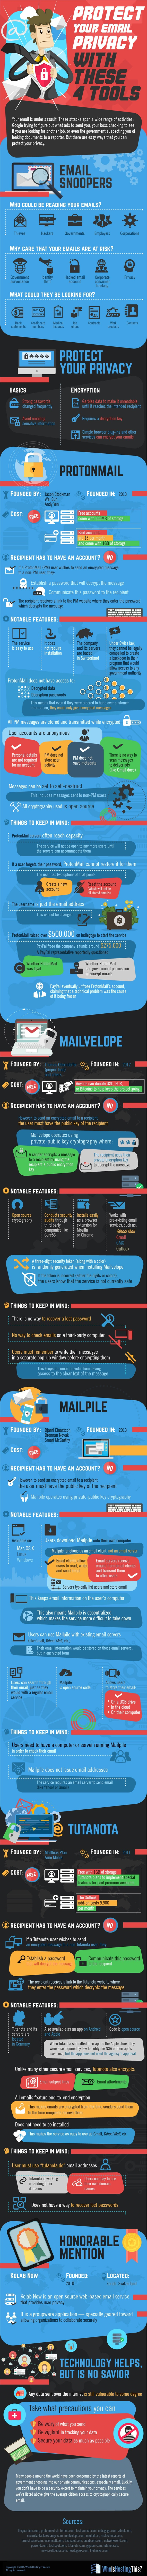 4 Email Privacy Tools [Infographic] - Digital Information World | The MarTech Digest | Scoop.it